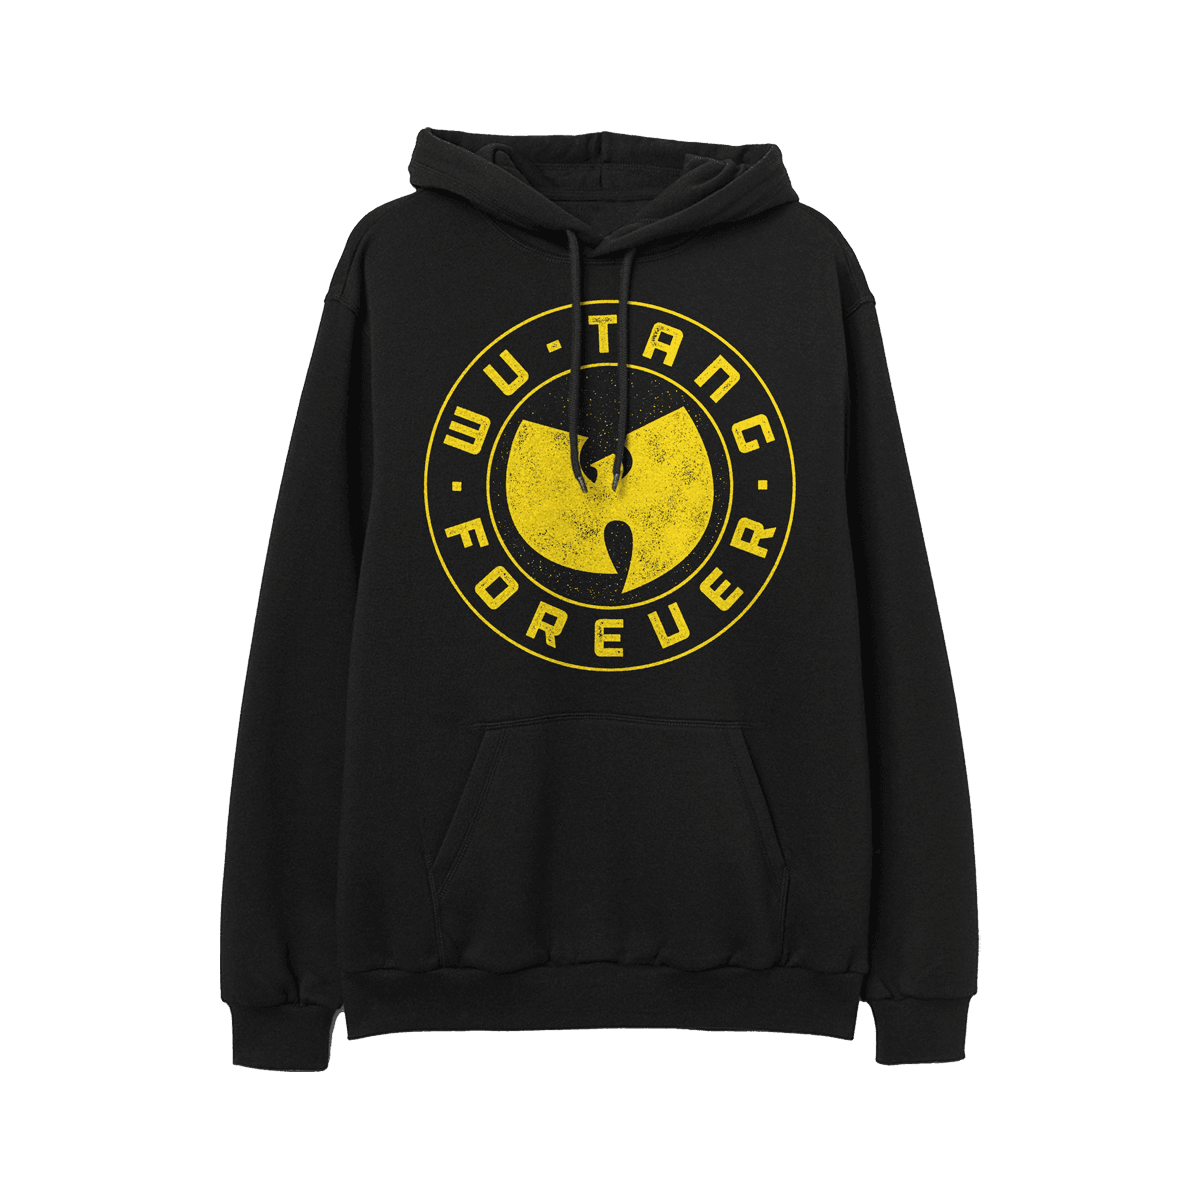 Classic Forever Hoodie - Black